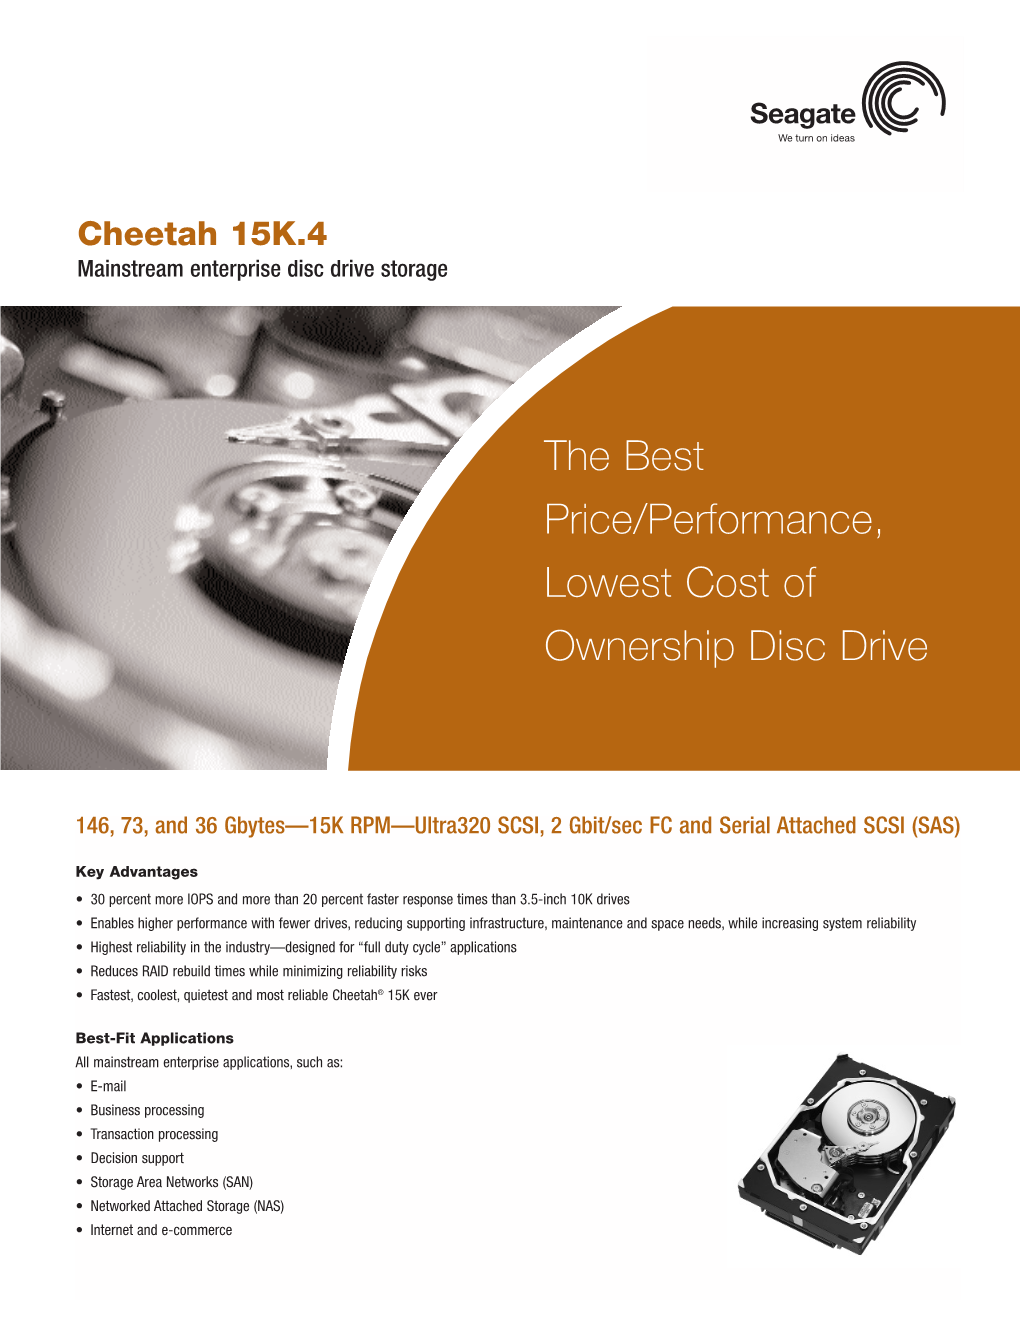 The Best Price/Performance, Lowest Cost of Ownership Disc Drive